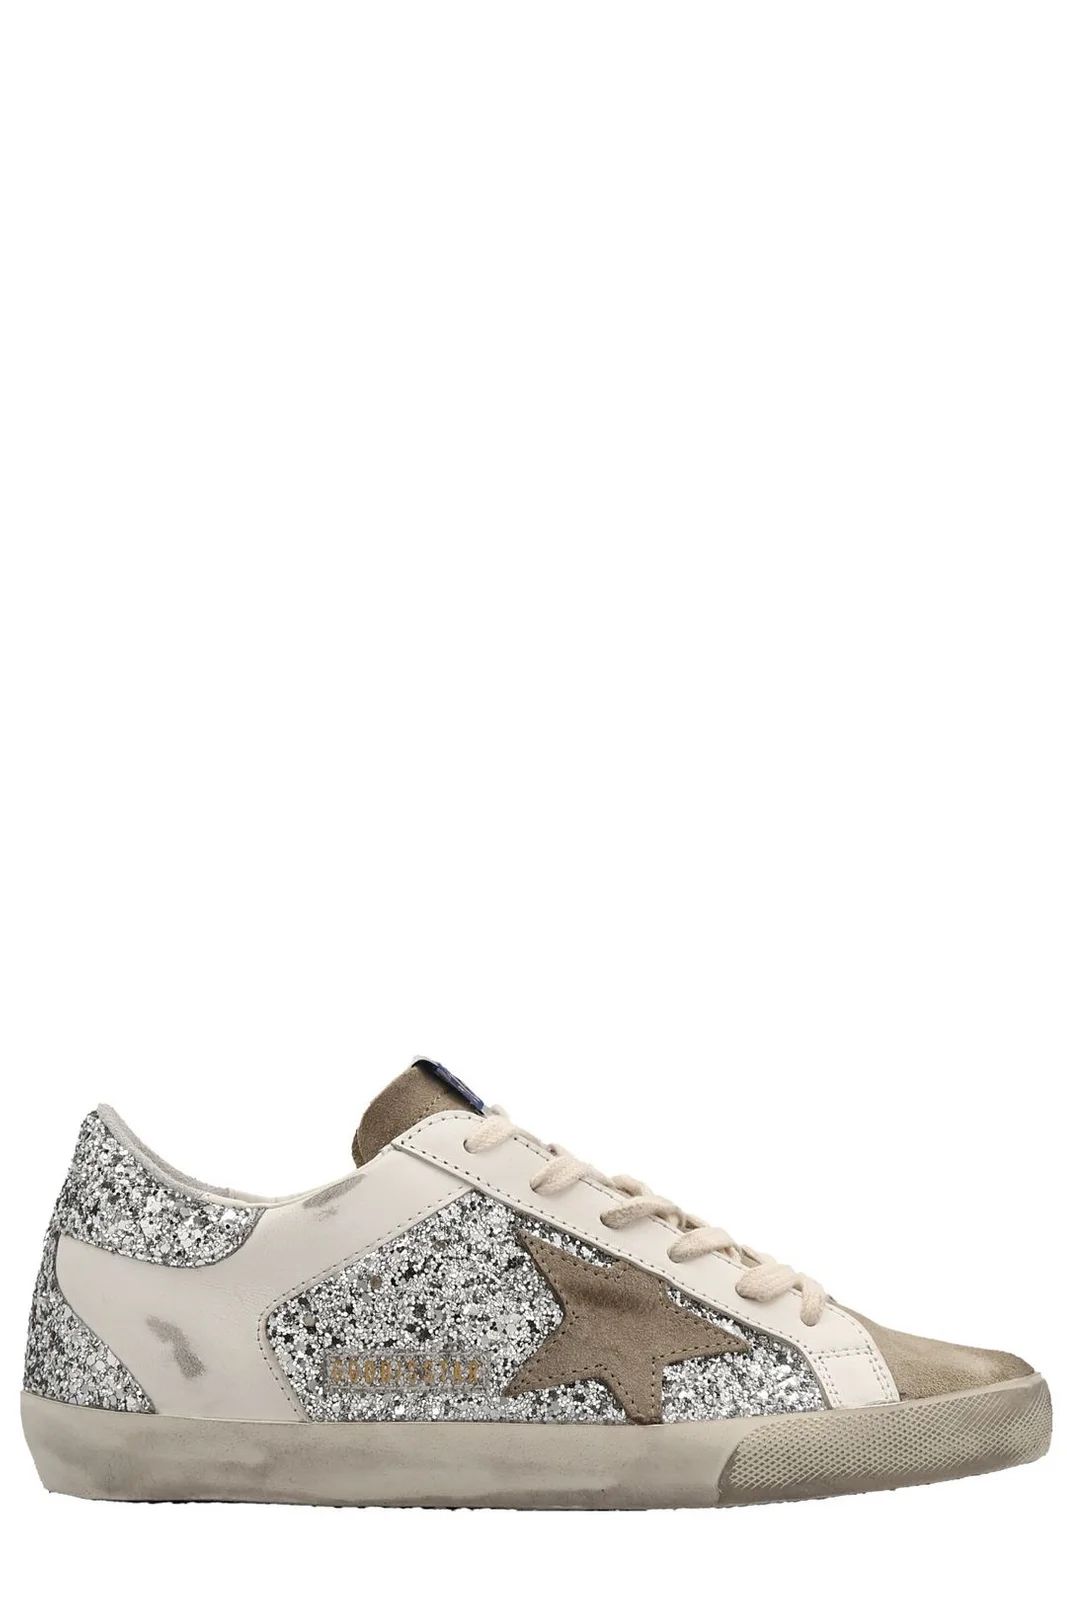 Golden Goose Deluxe Brand Star Patch Low-Top Sneakers | Cettire Global